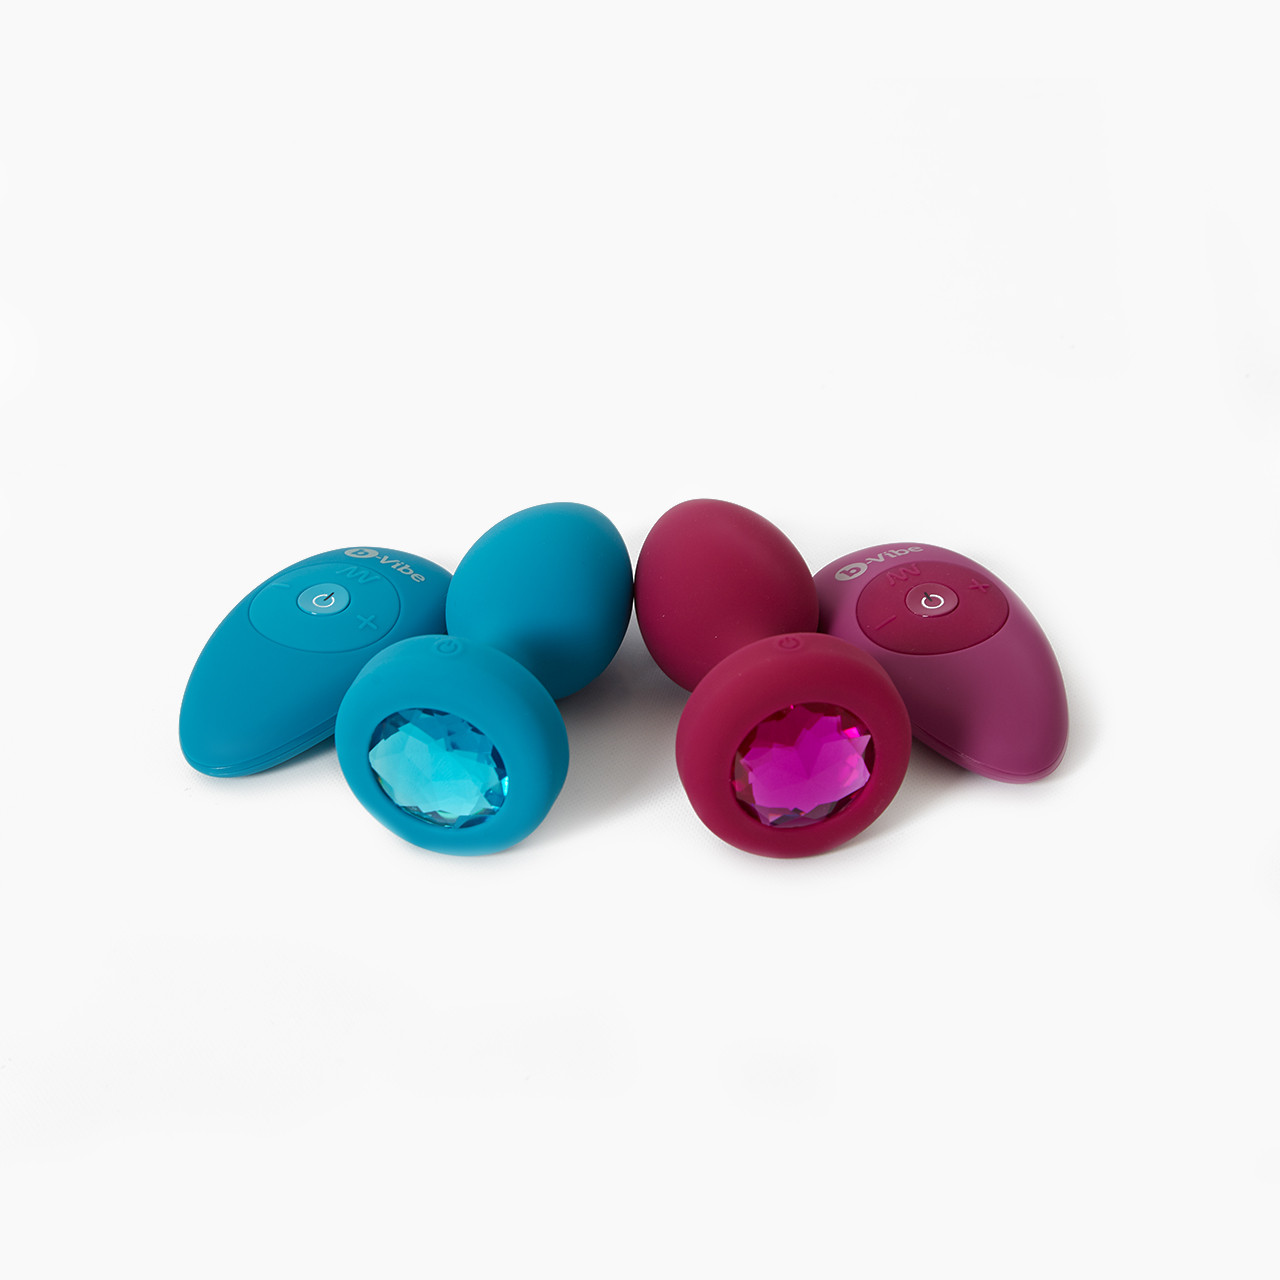 b-Vibe Vibrating Jewel Plugs in Blue and Pink